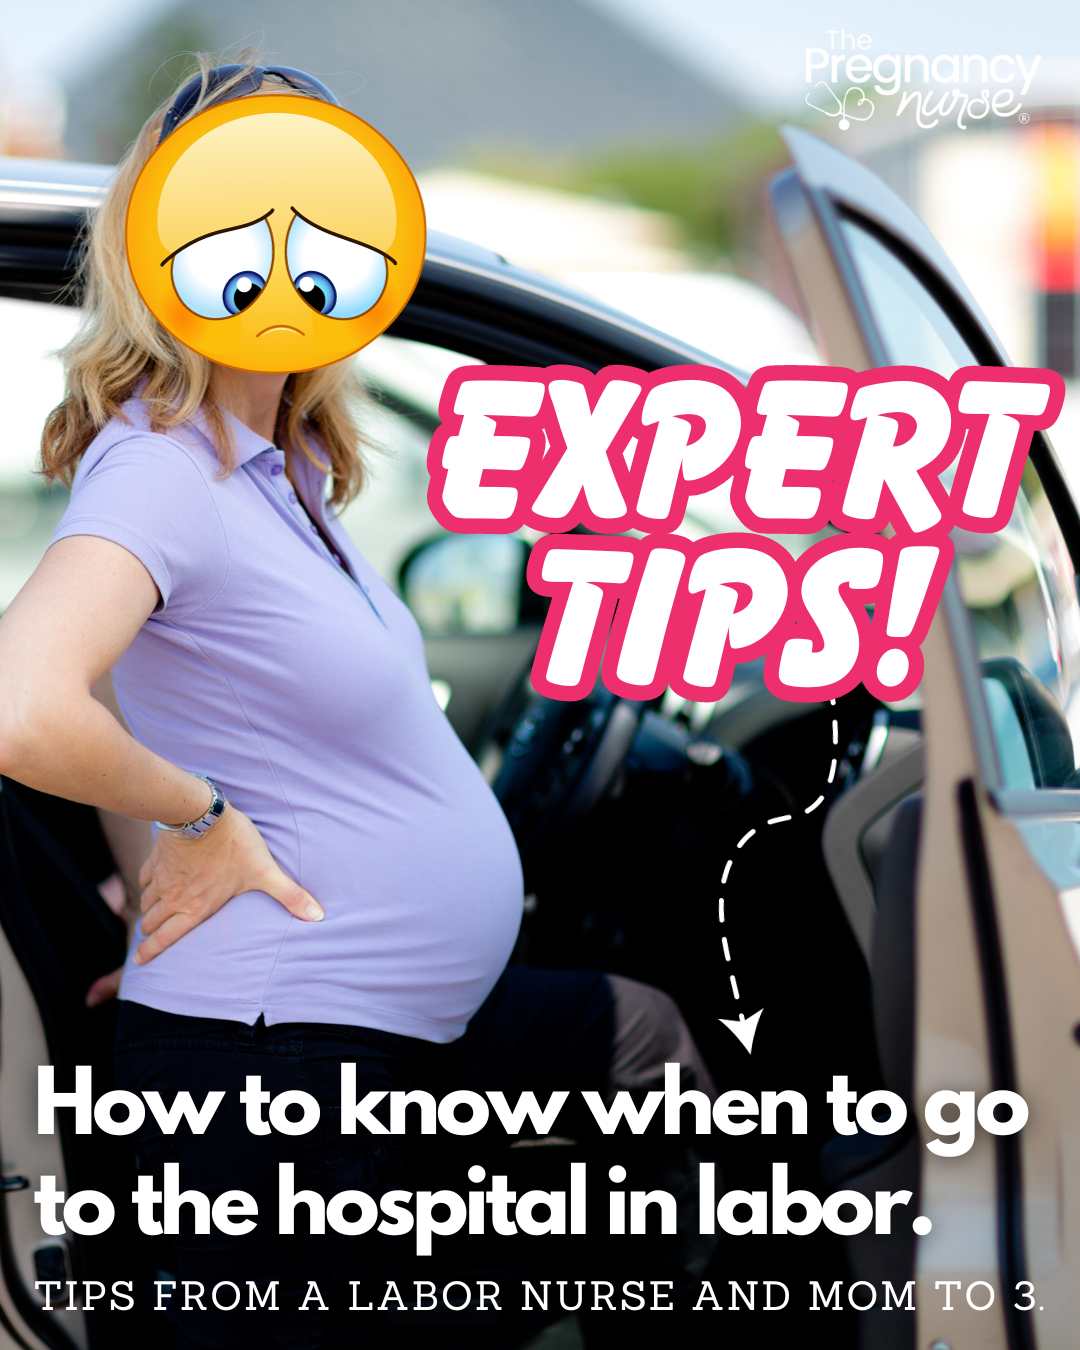 sad pregnant woman getting in a car / expert timps -- how to know when to go to the hospital in labor. Tips from a labor nurse and mom to 3.